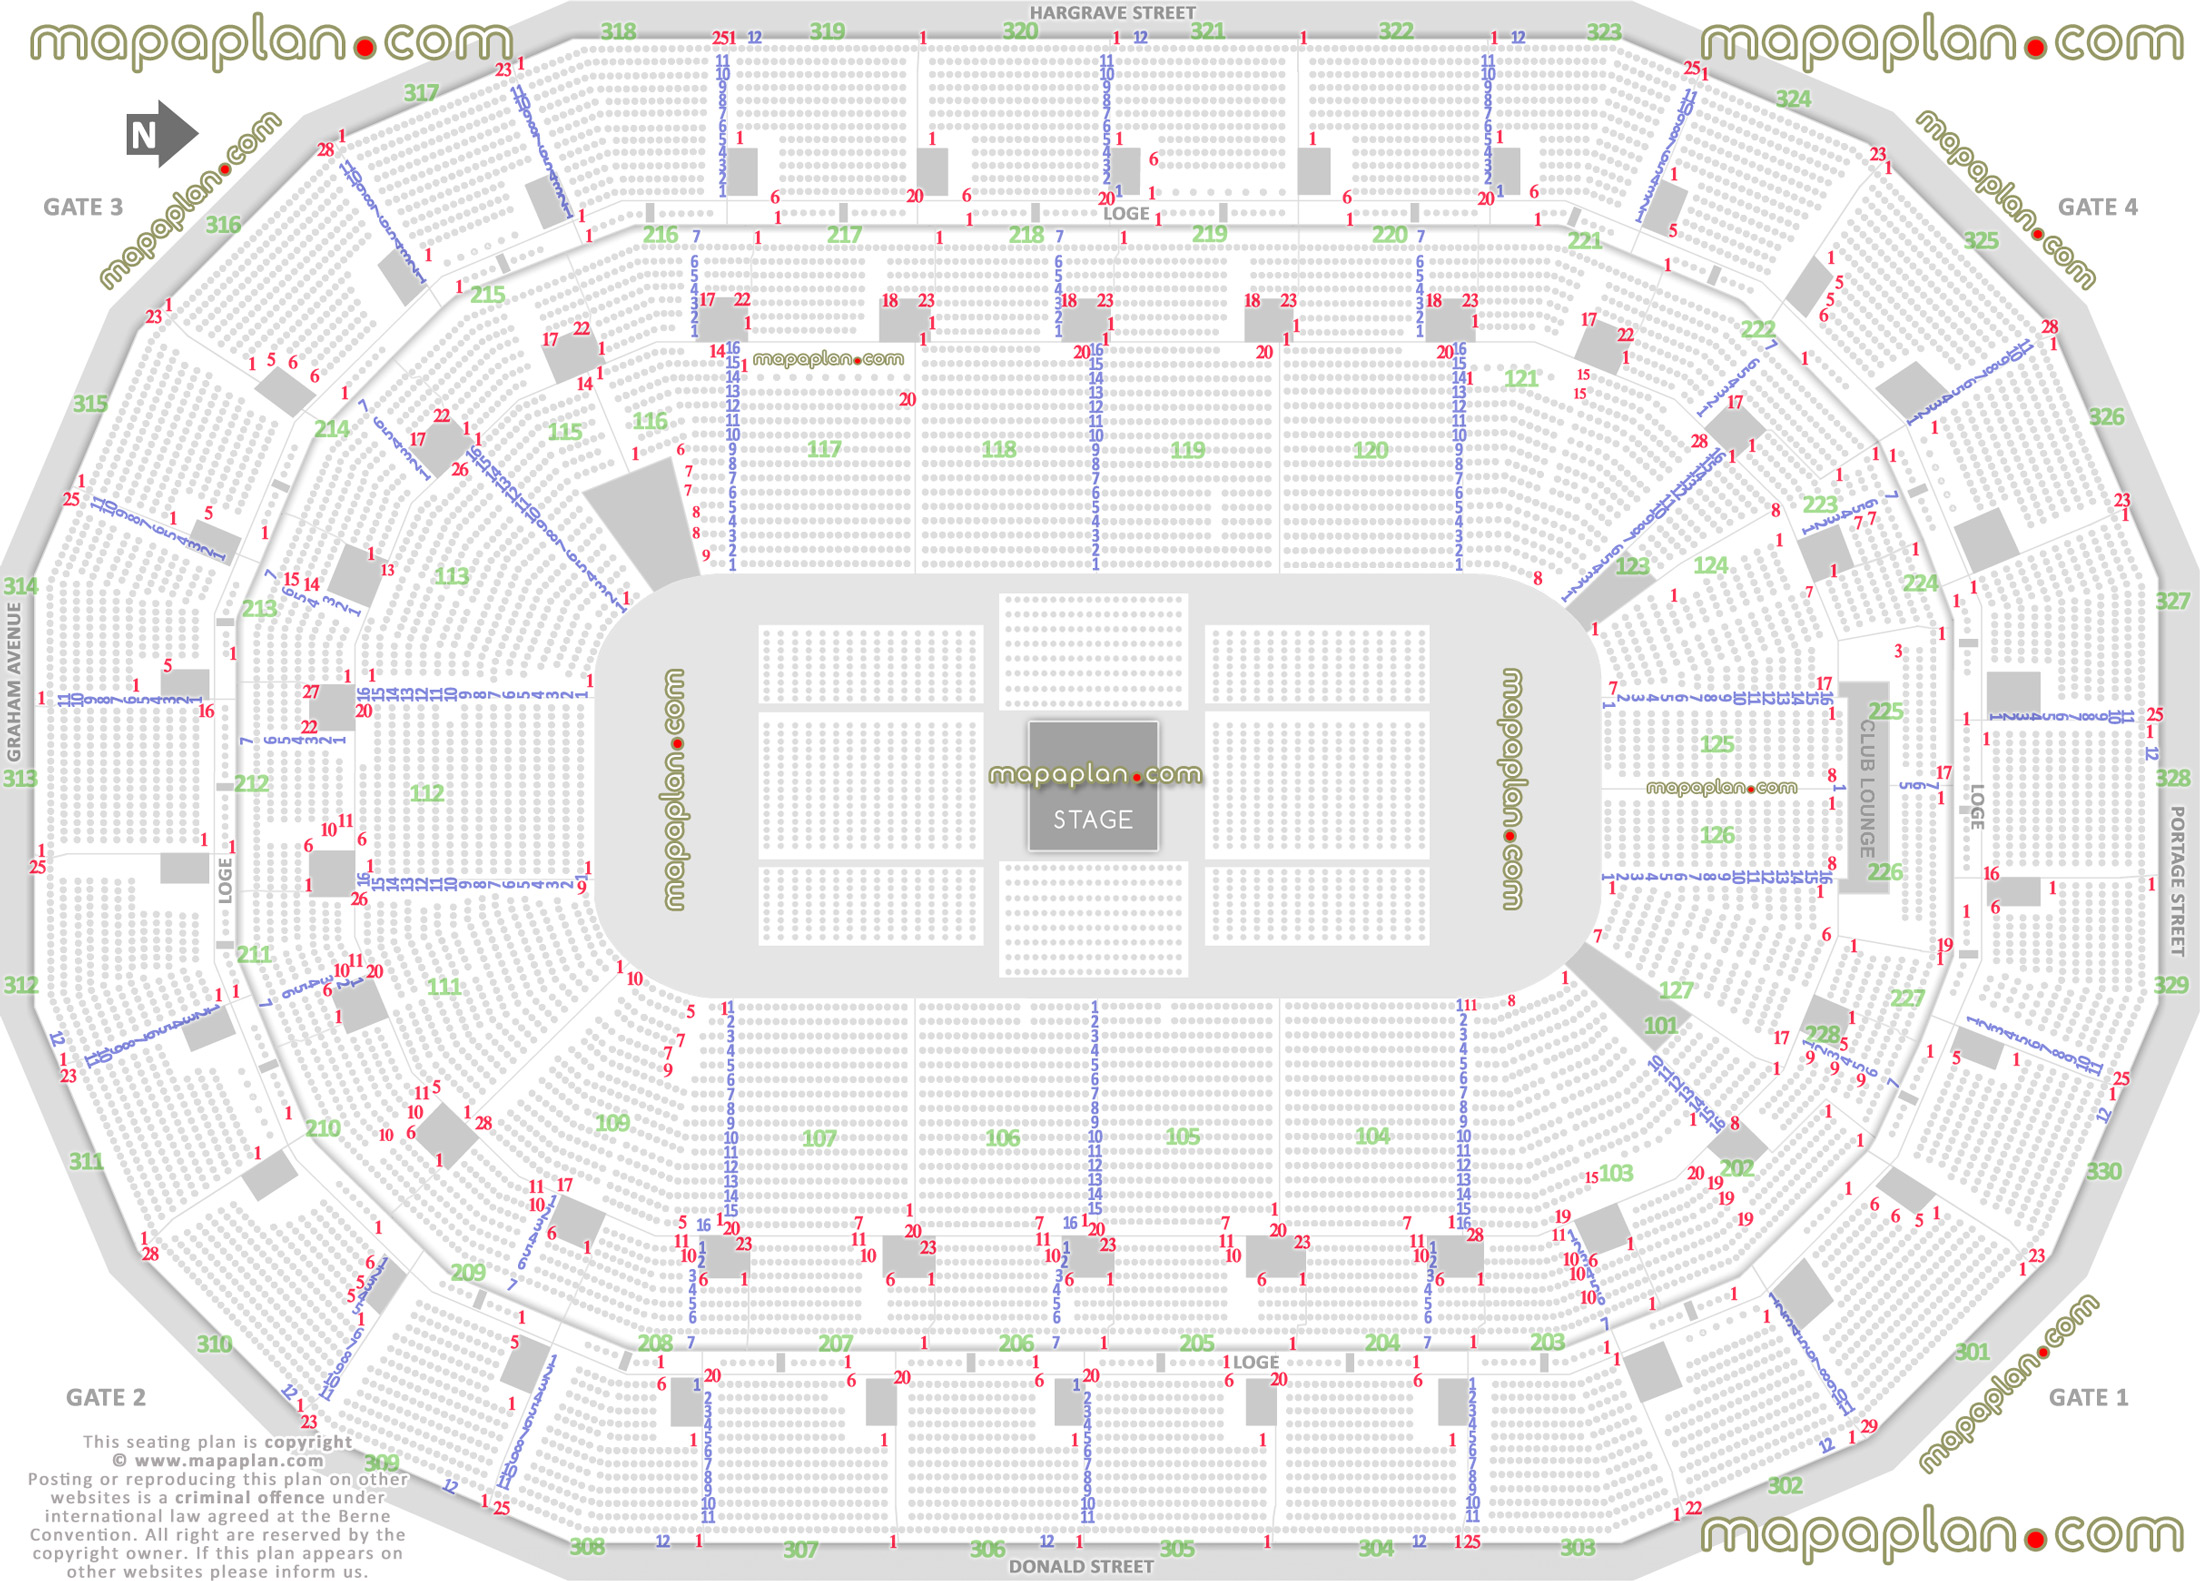 concert stage round 360 degree arrangement how many seats per row balcony sections 301 302 303 304 305 306 307 308 309 310 311 312 313 314 315 316 317 318 319 320 321 322 323 324 325 326 327 328 329 330 Winnipeg MTS Centre seating chart